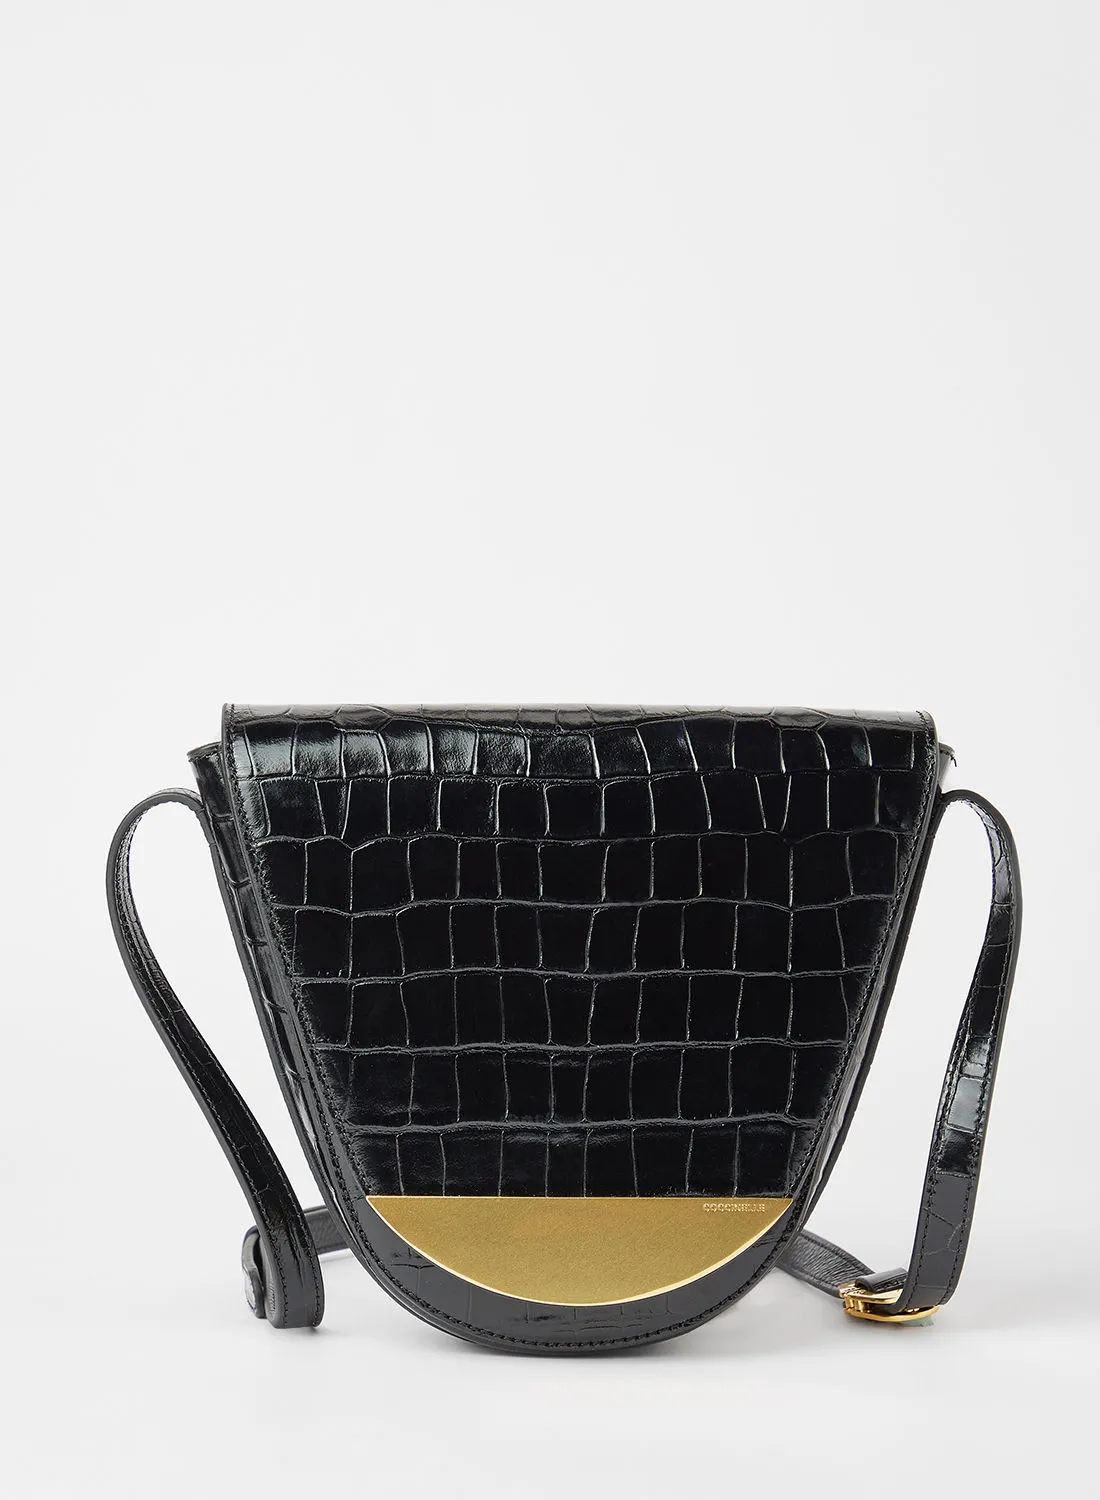 COCCINELLE Textured Leather Crossbody Bag Black